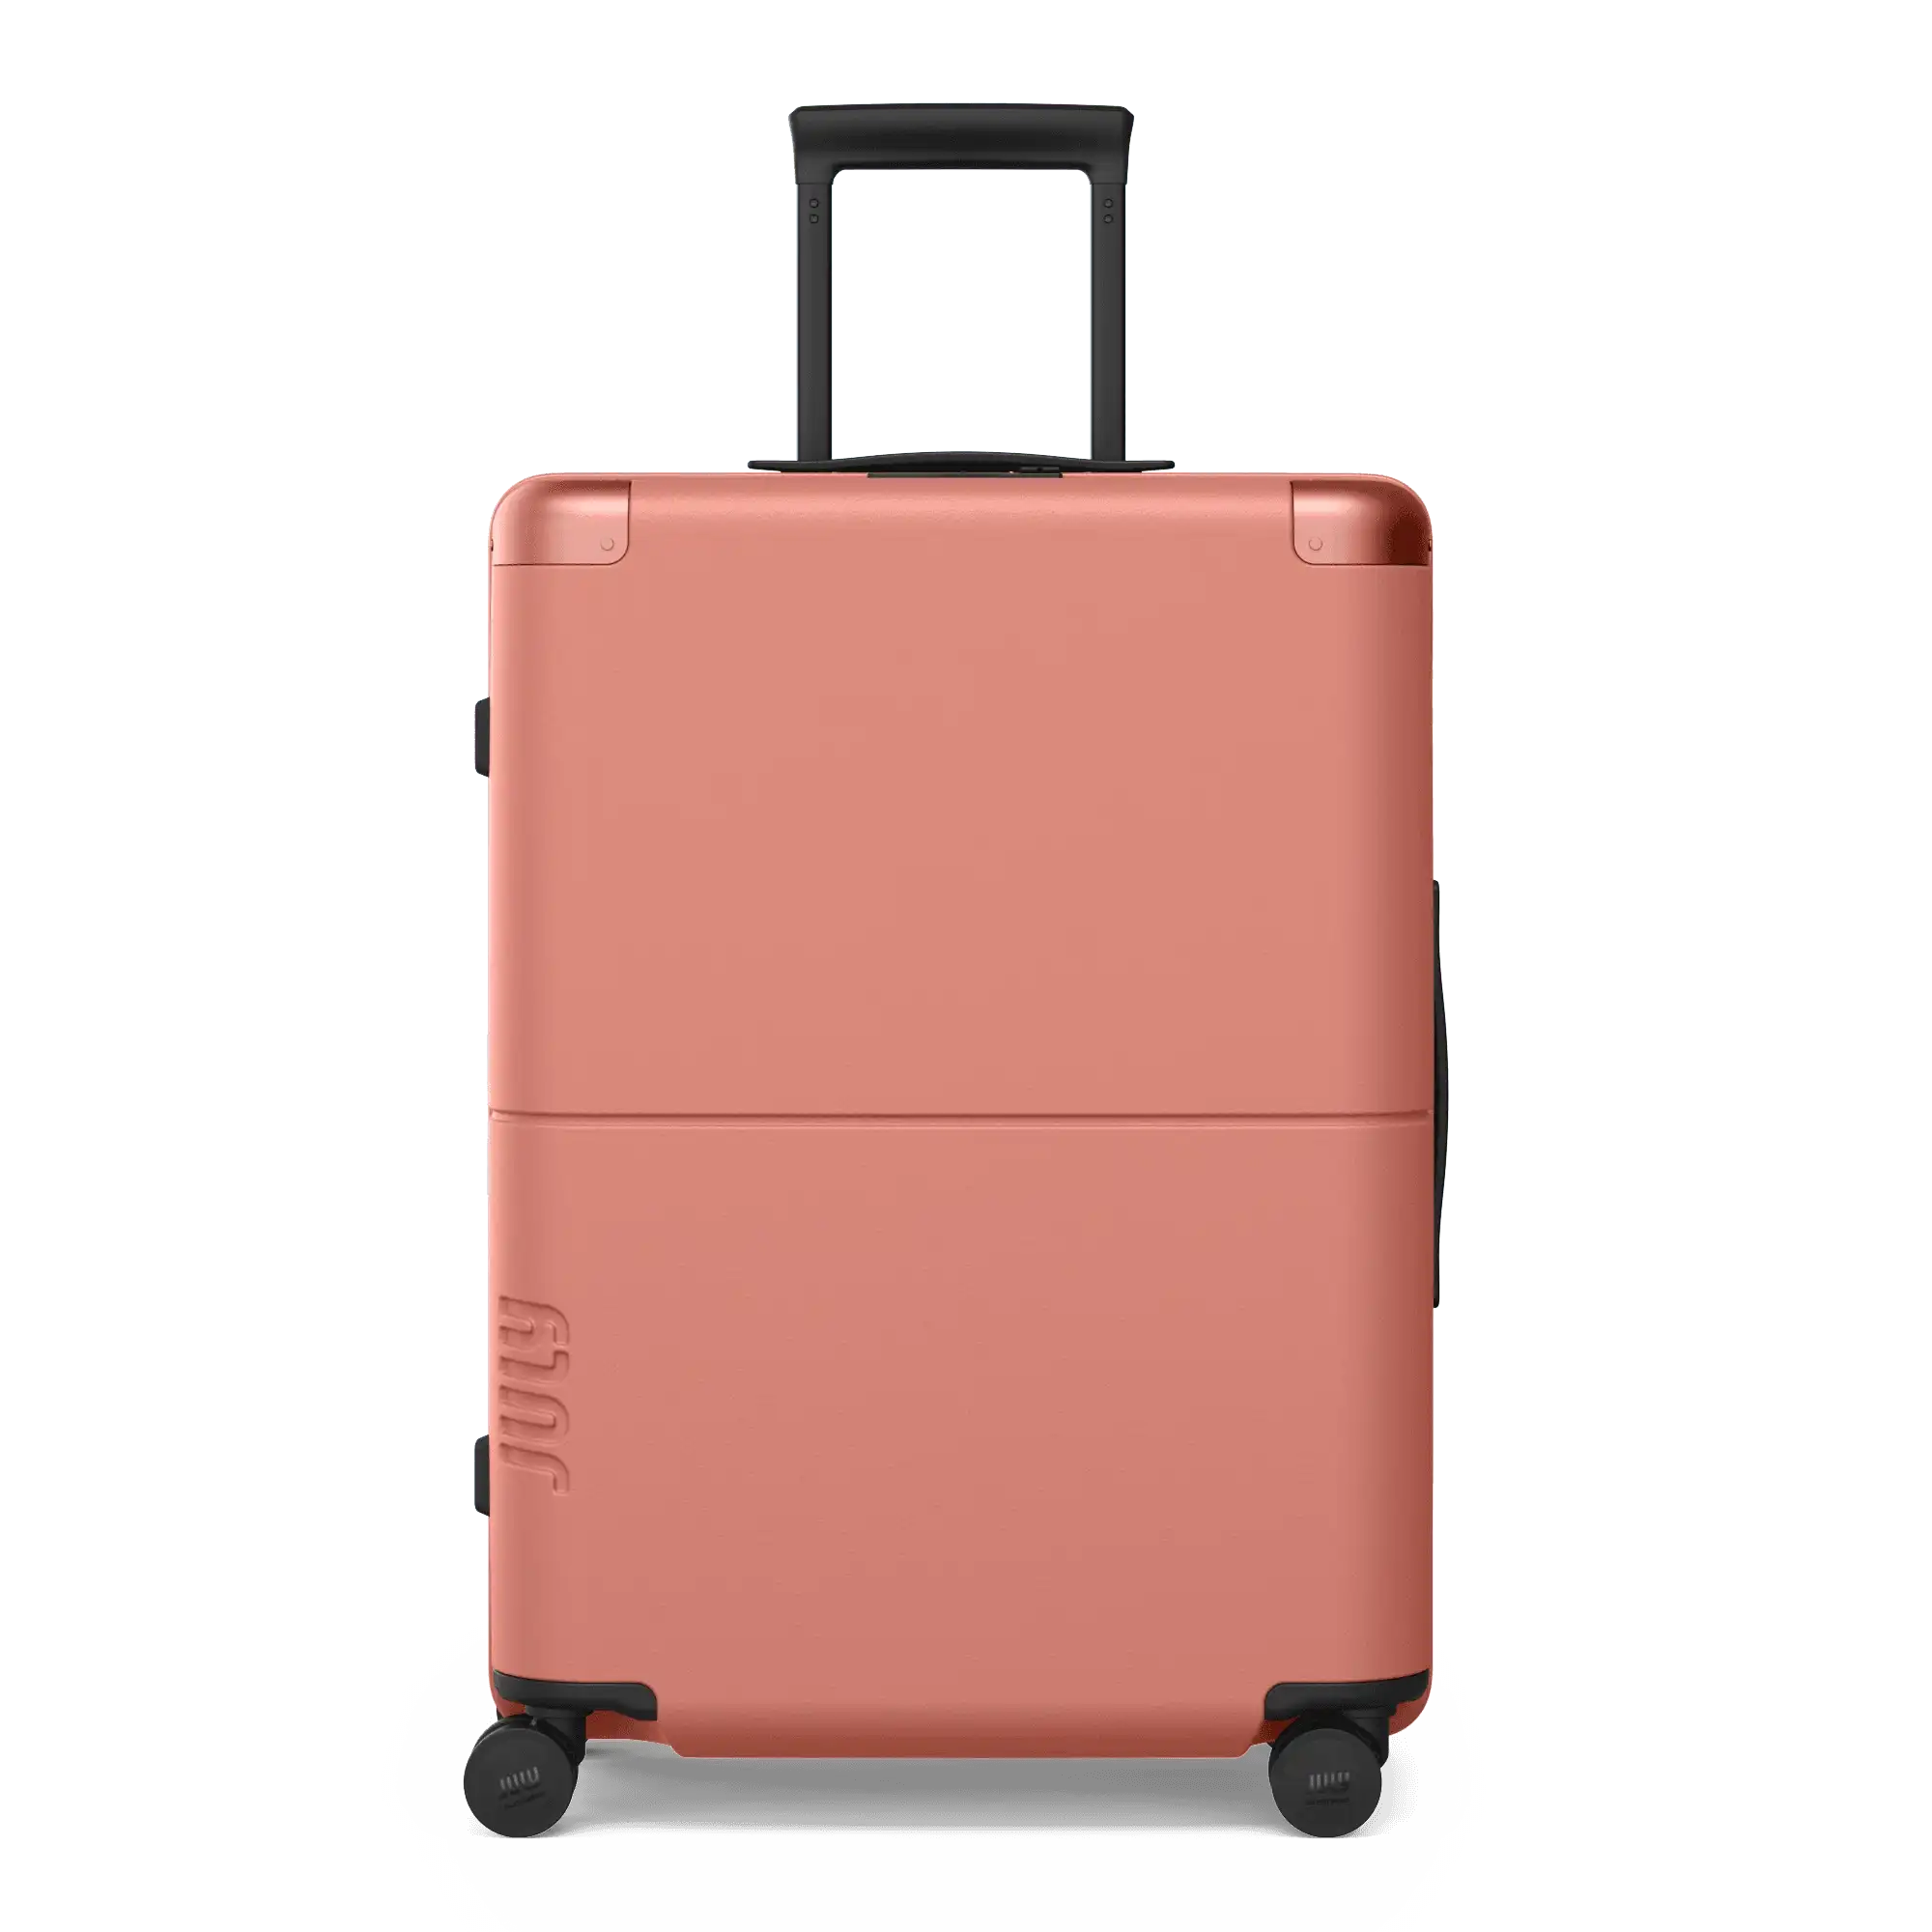 Best budget luggage under $200: Tested and loved